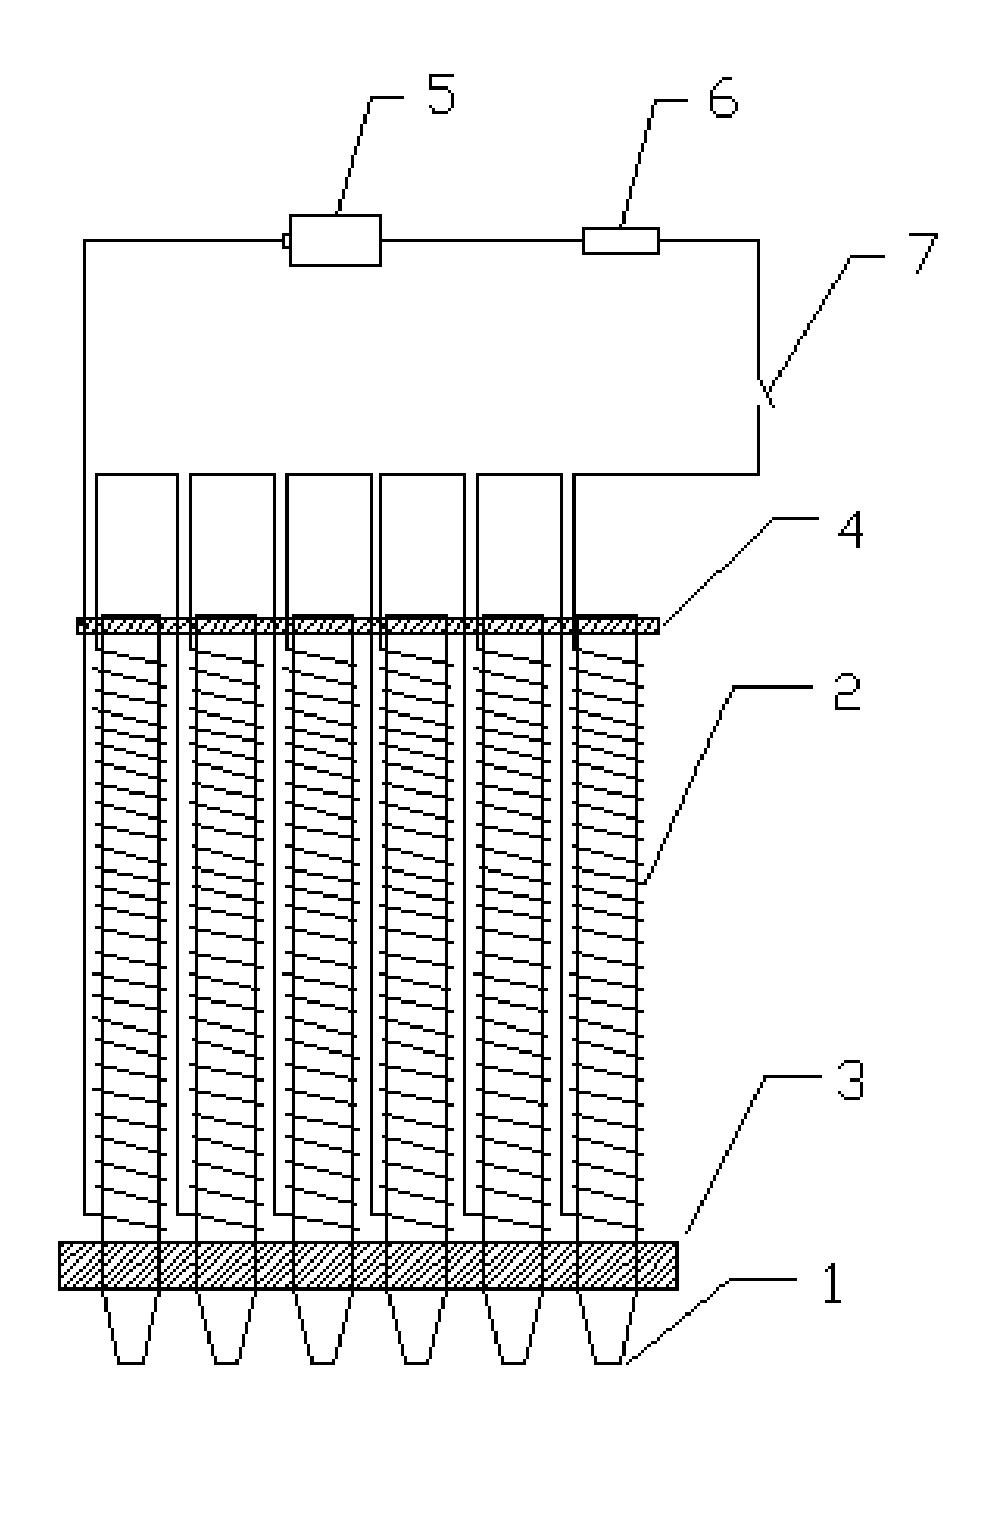 Method and equipment for making abrasive particles in even distribution, array pattern and preferred orientation